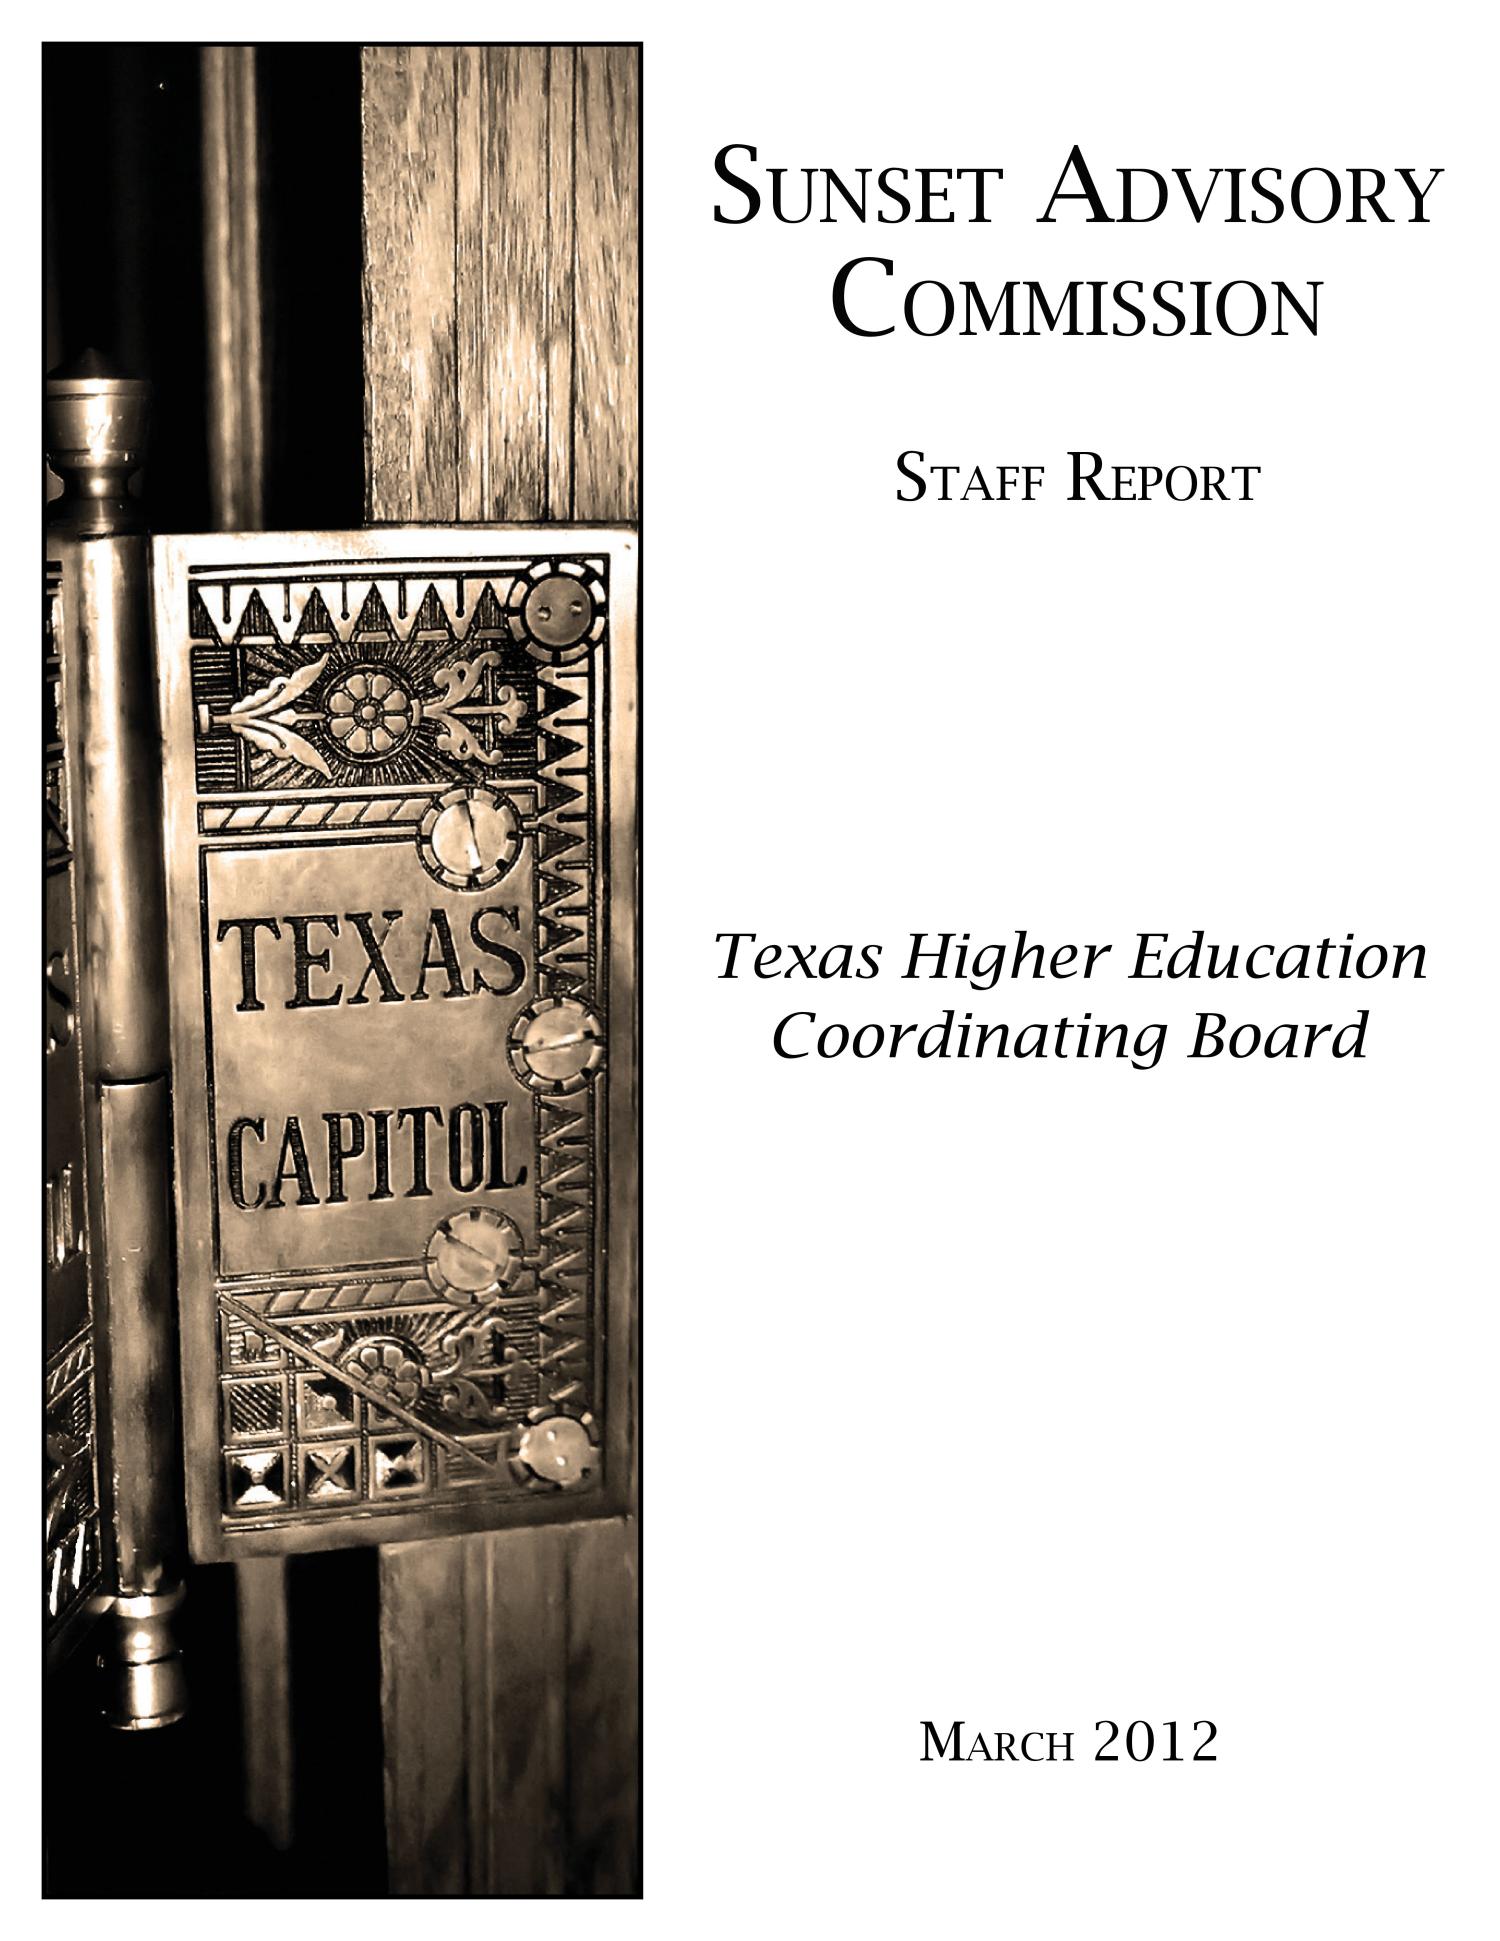 Sunset Commission Staff Report: Texas Higher Education Coordinating Board
                                                
                                                    Title Page
                                                